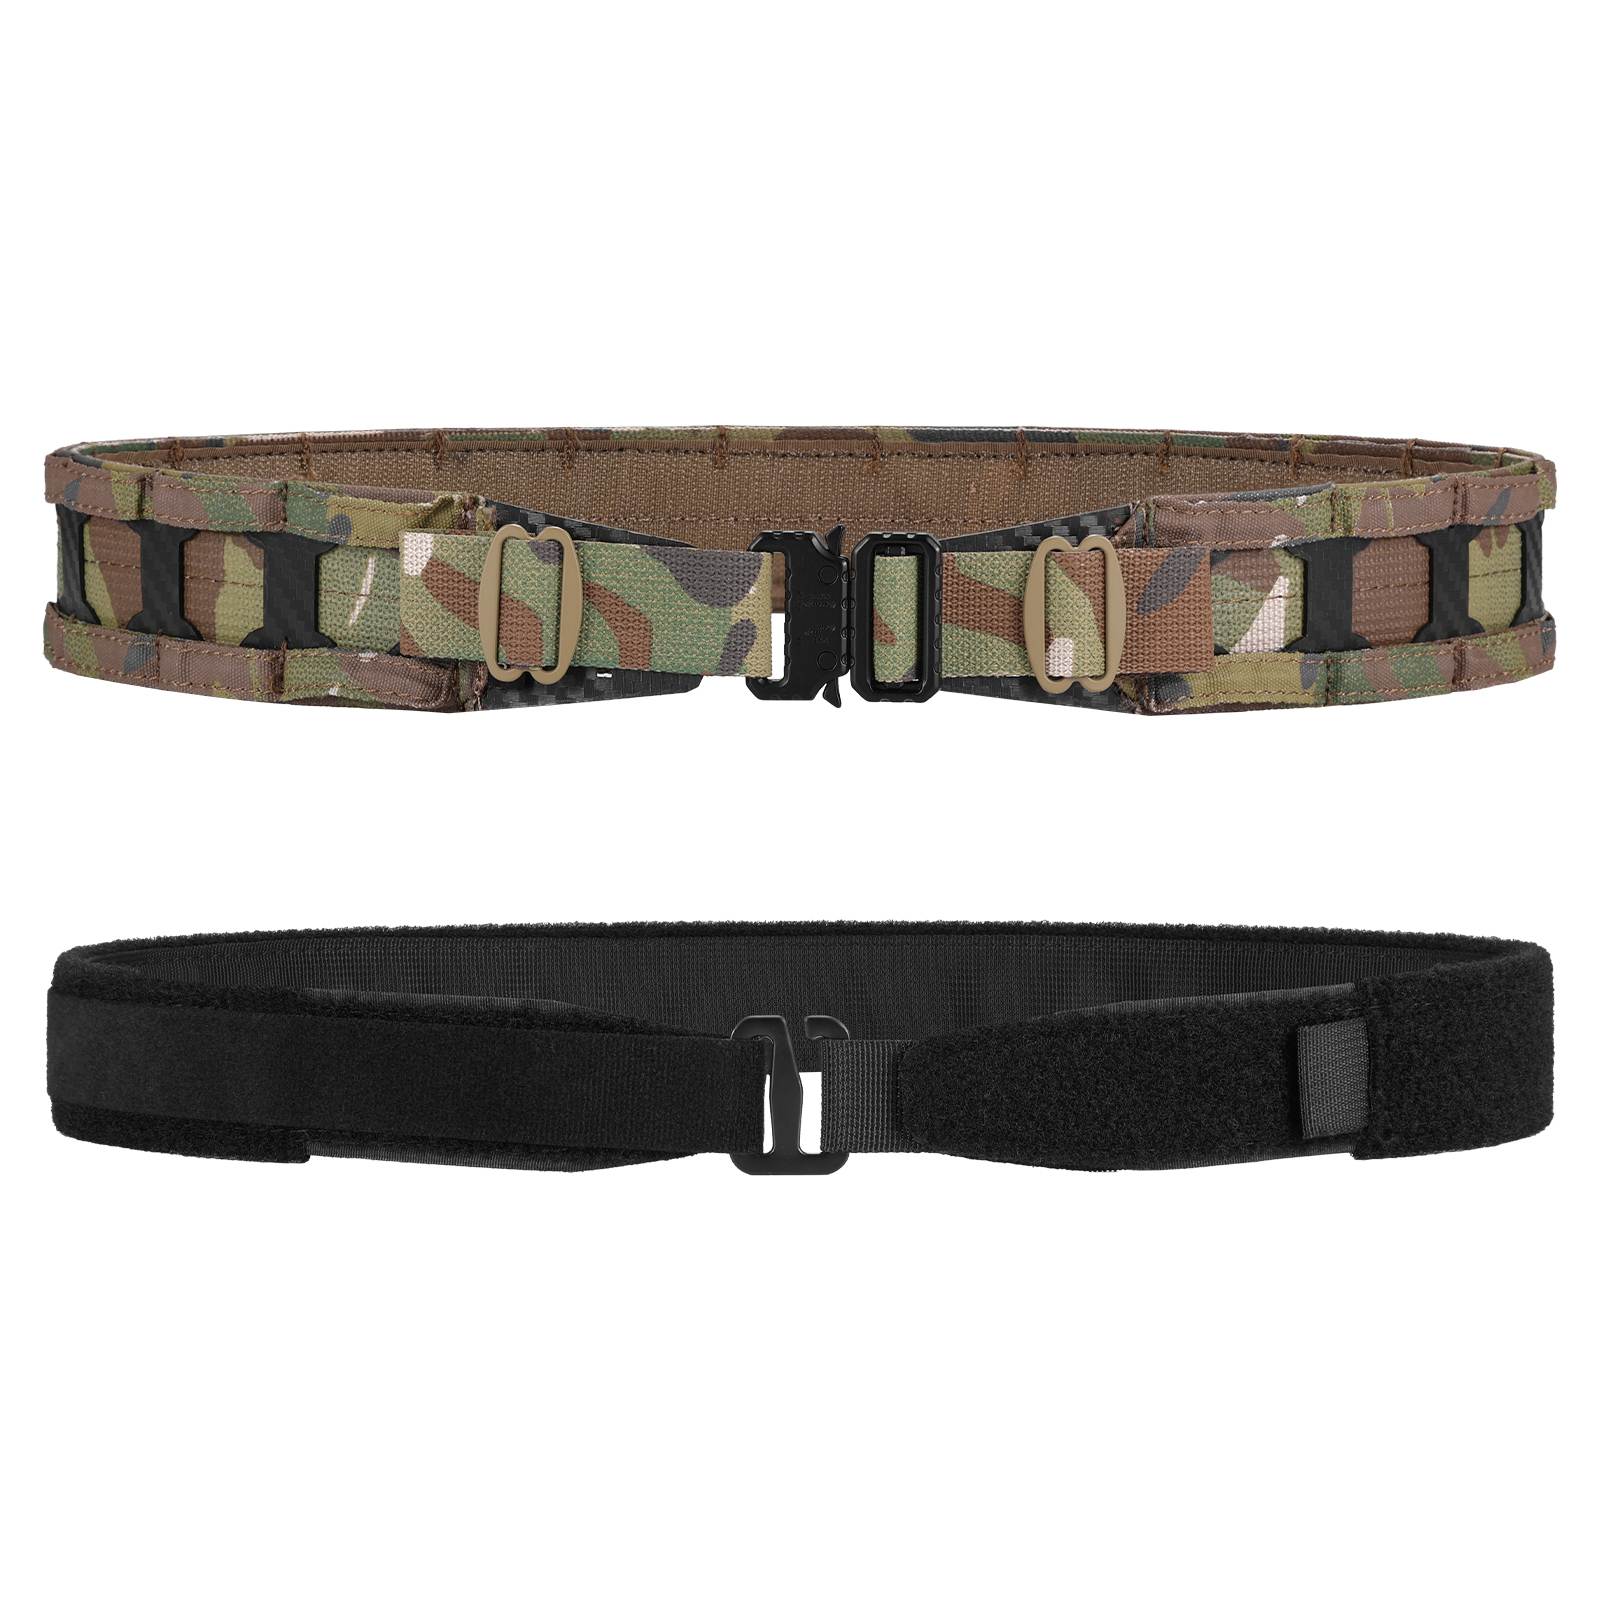 1.75'' MOLLE Battle Belt with Quick Release Buckle